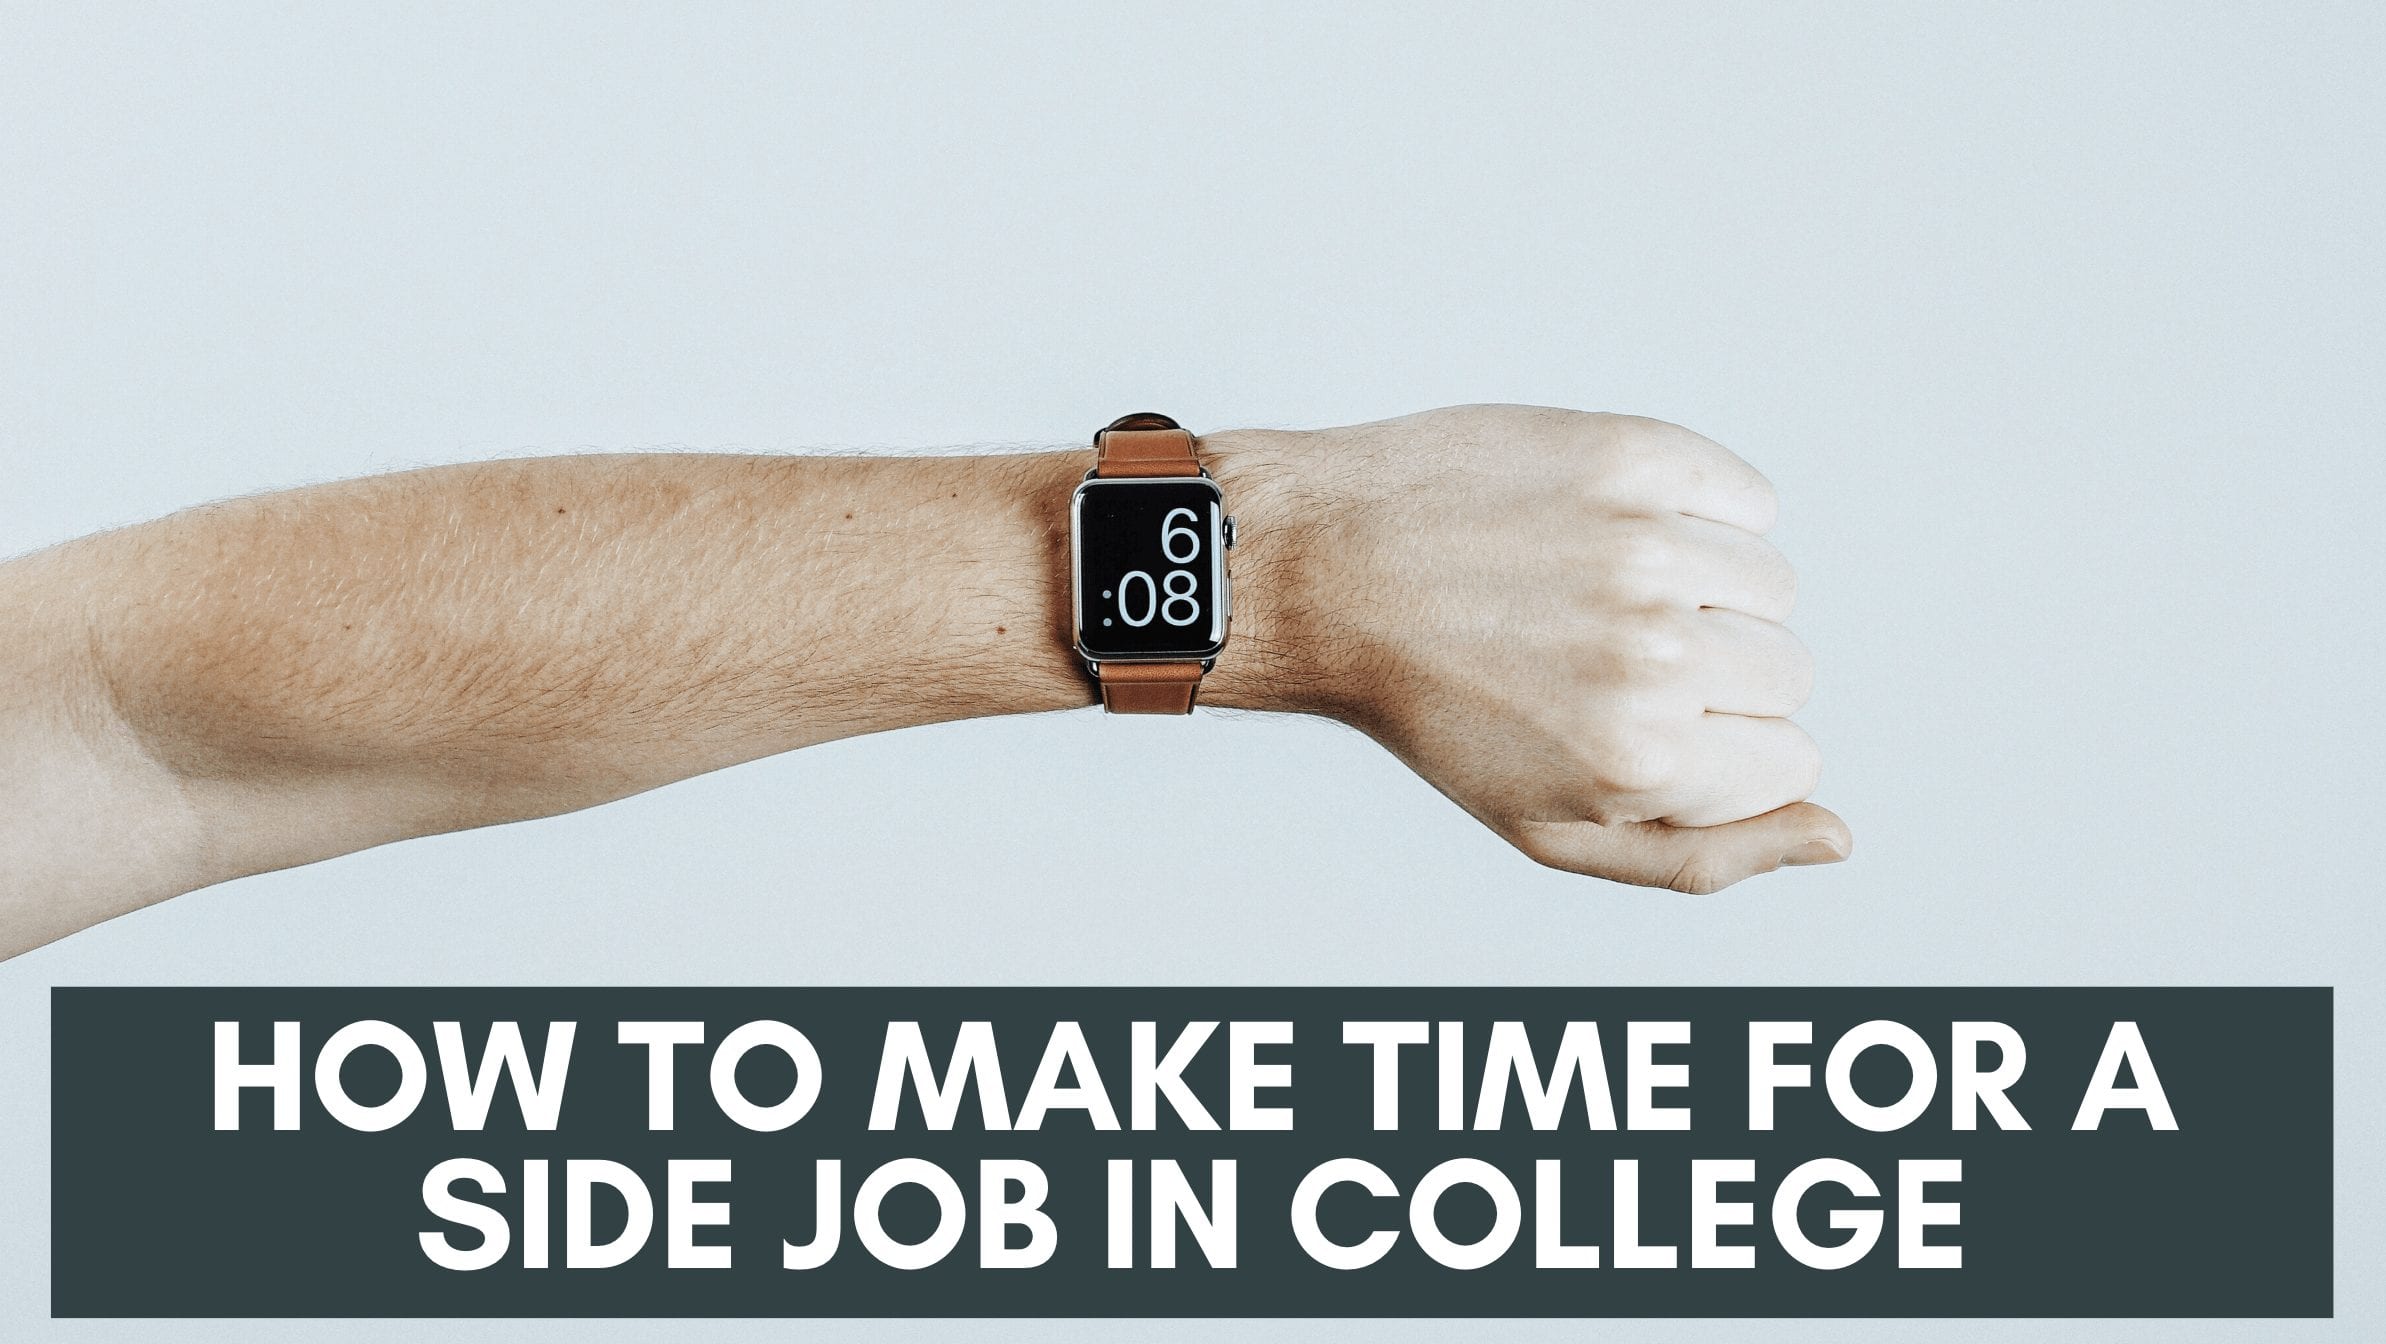 How to make time for a side job in college